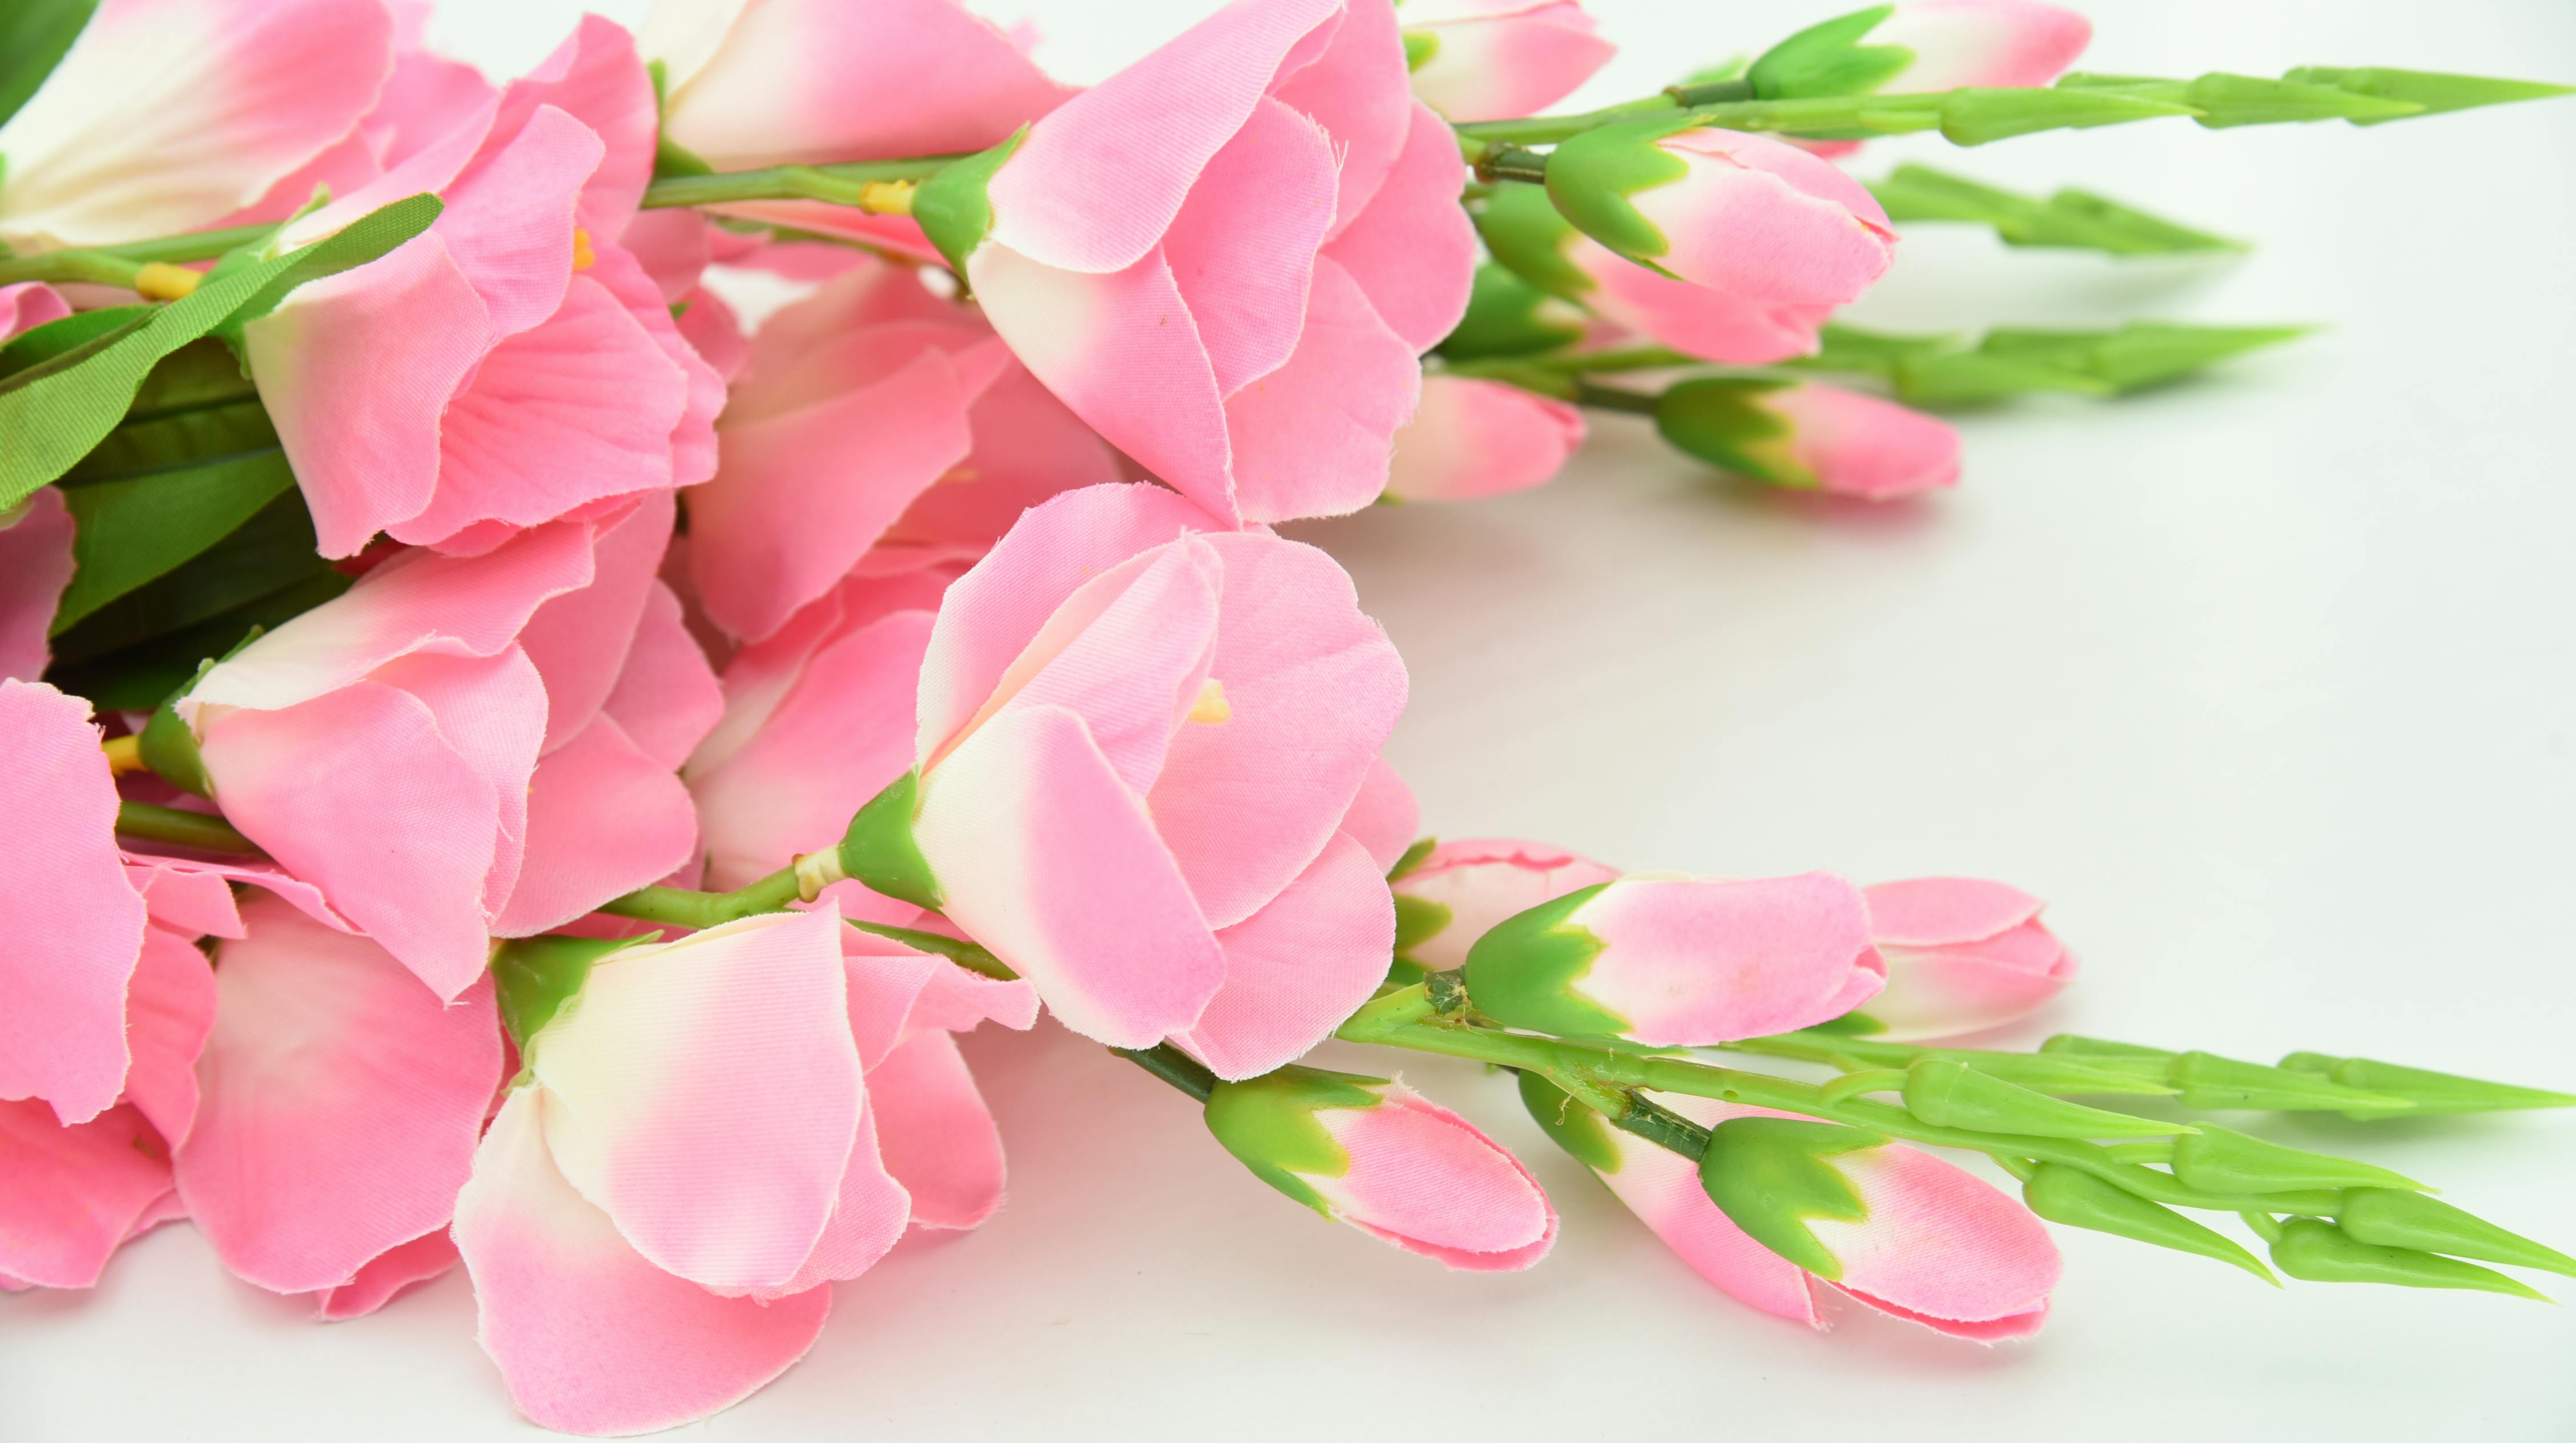 Shallow Focus Photography Of Pink Flowers Free Stock Photo